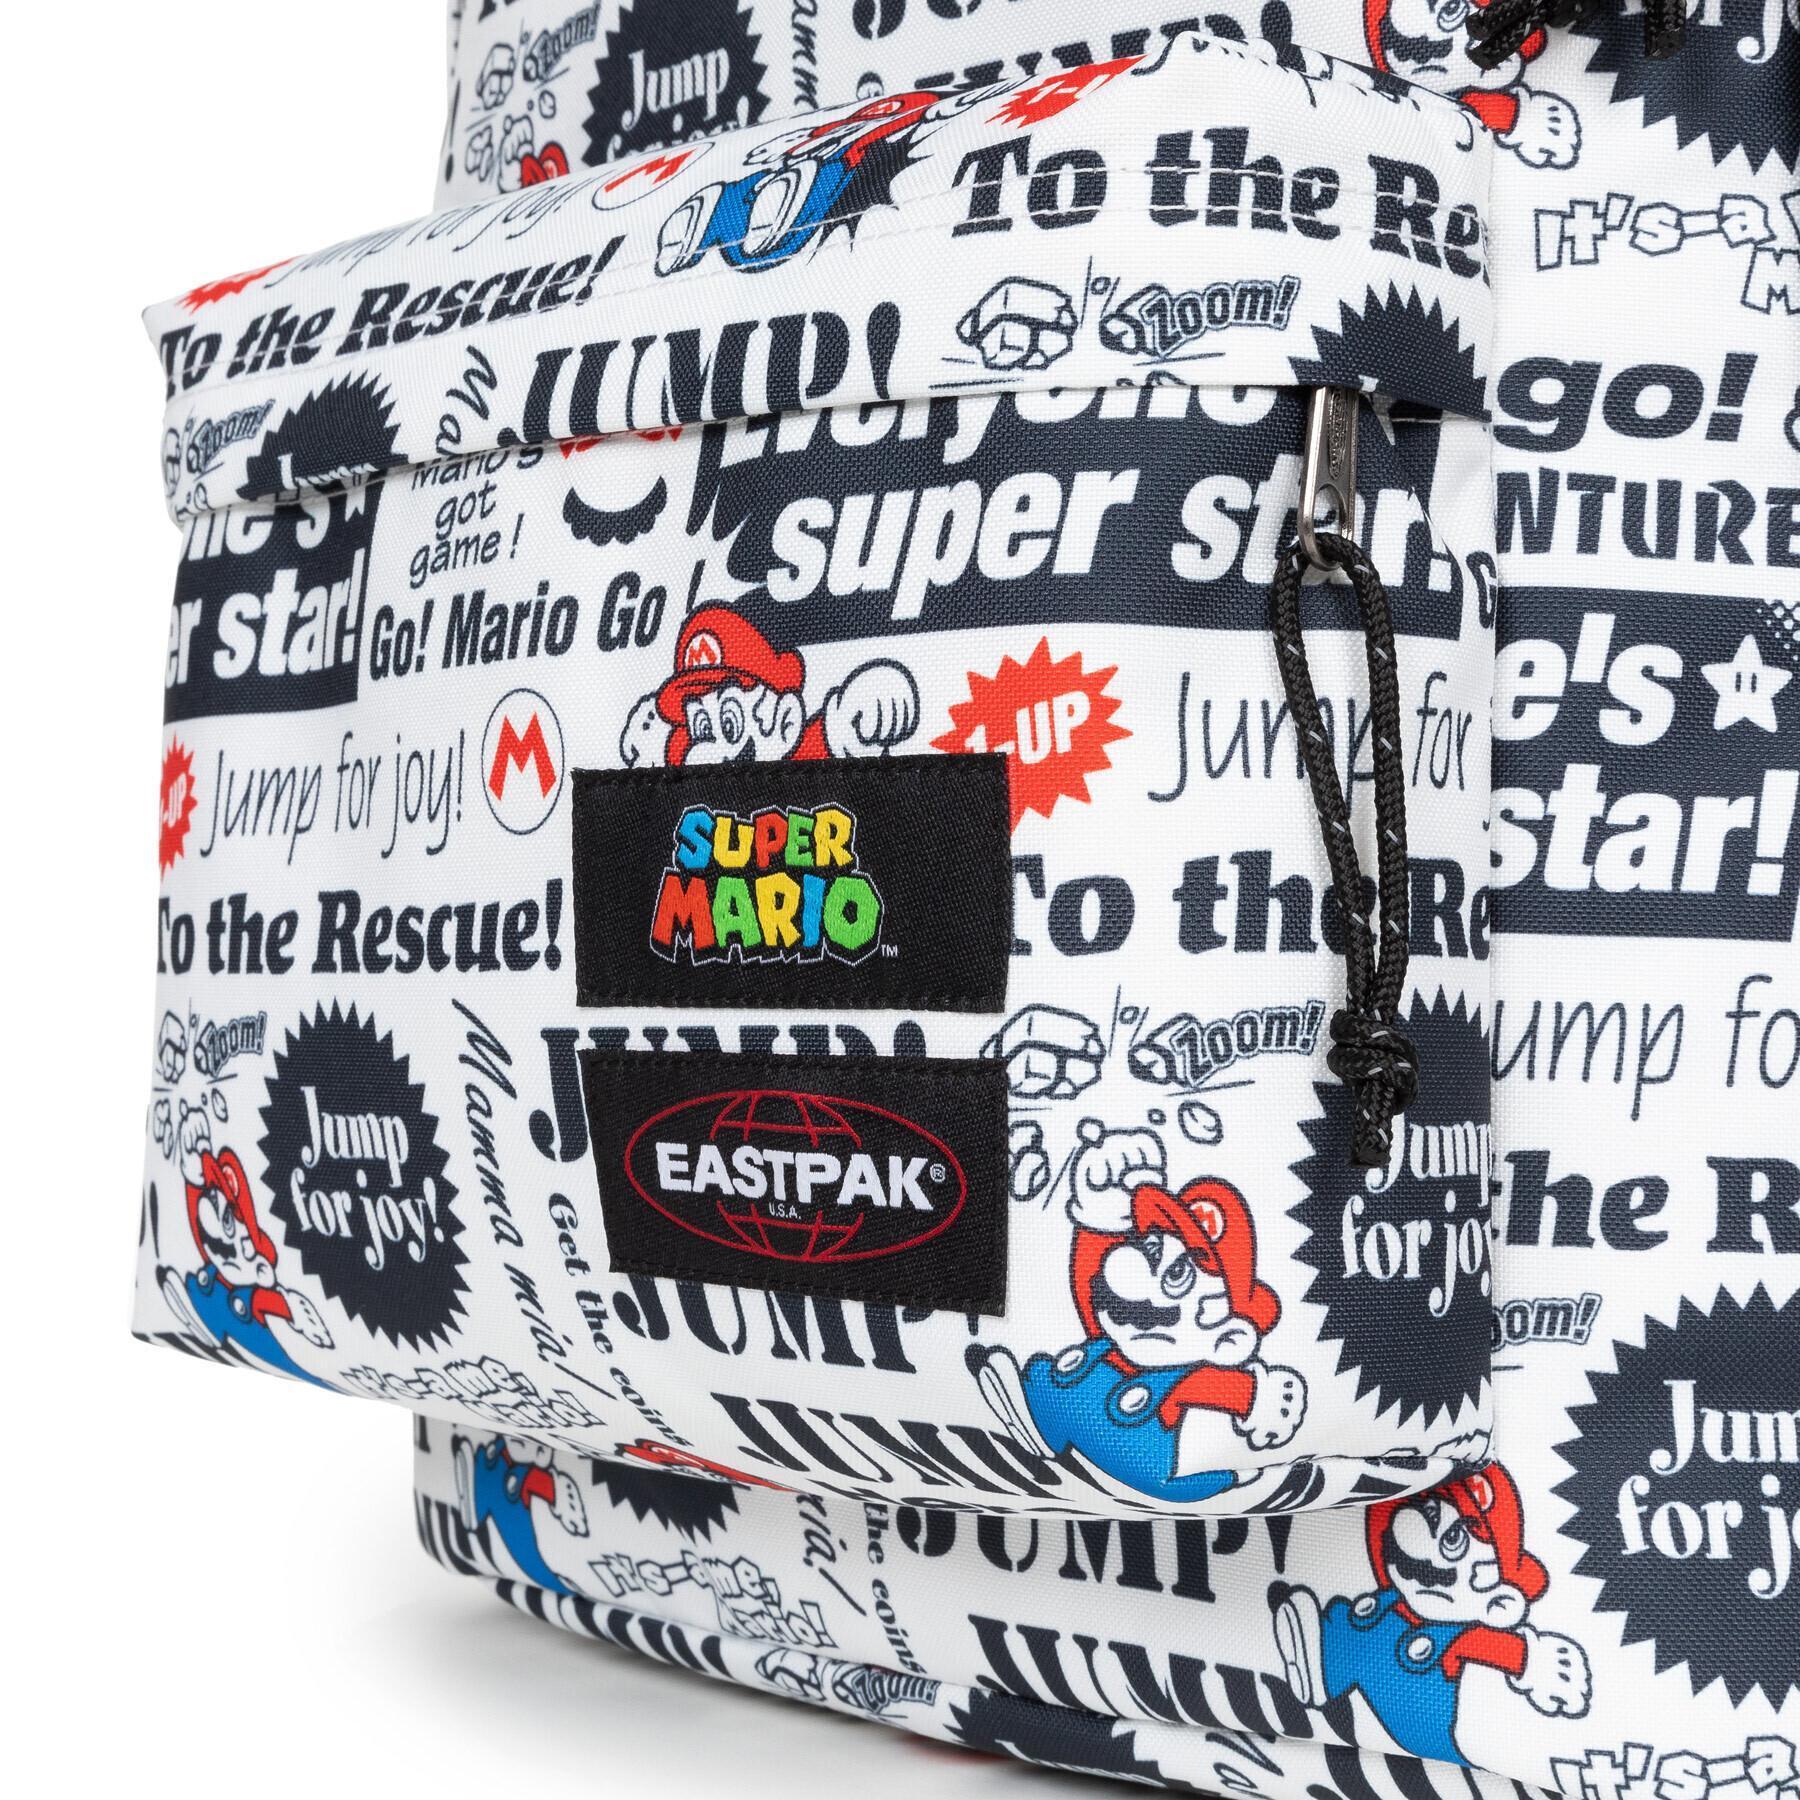 Rucksack Eastpak Out of Office